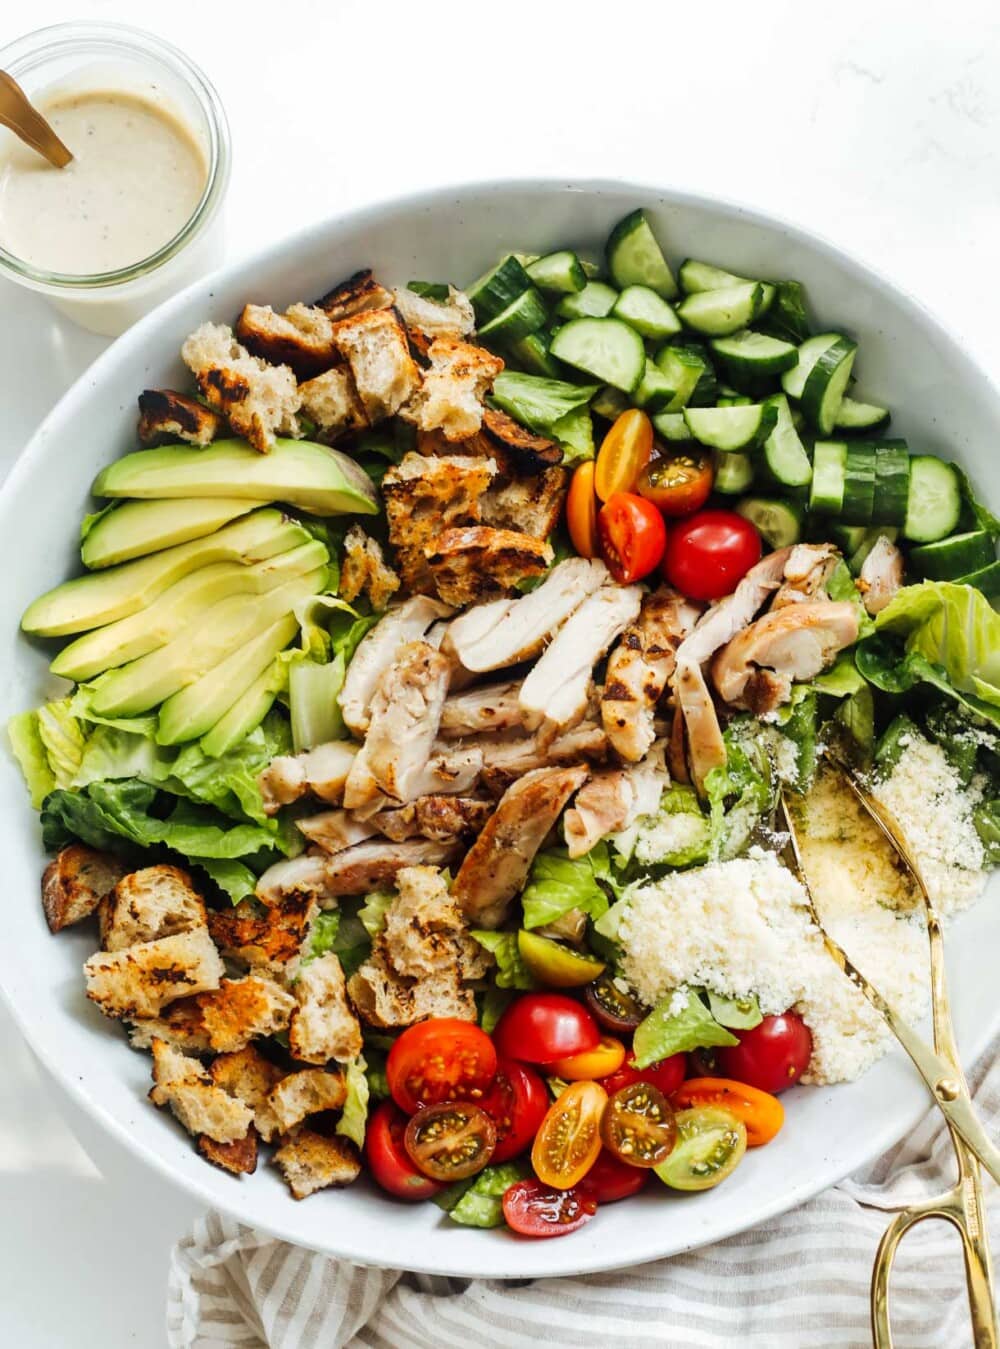 grilled chicken caesar salad ingredients in a large blue bowl